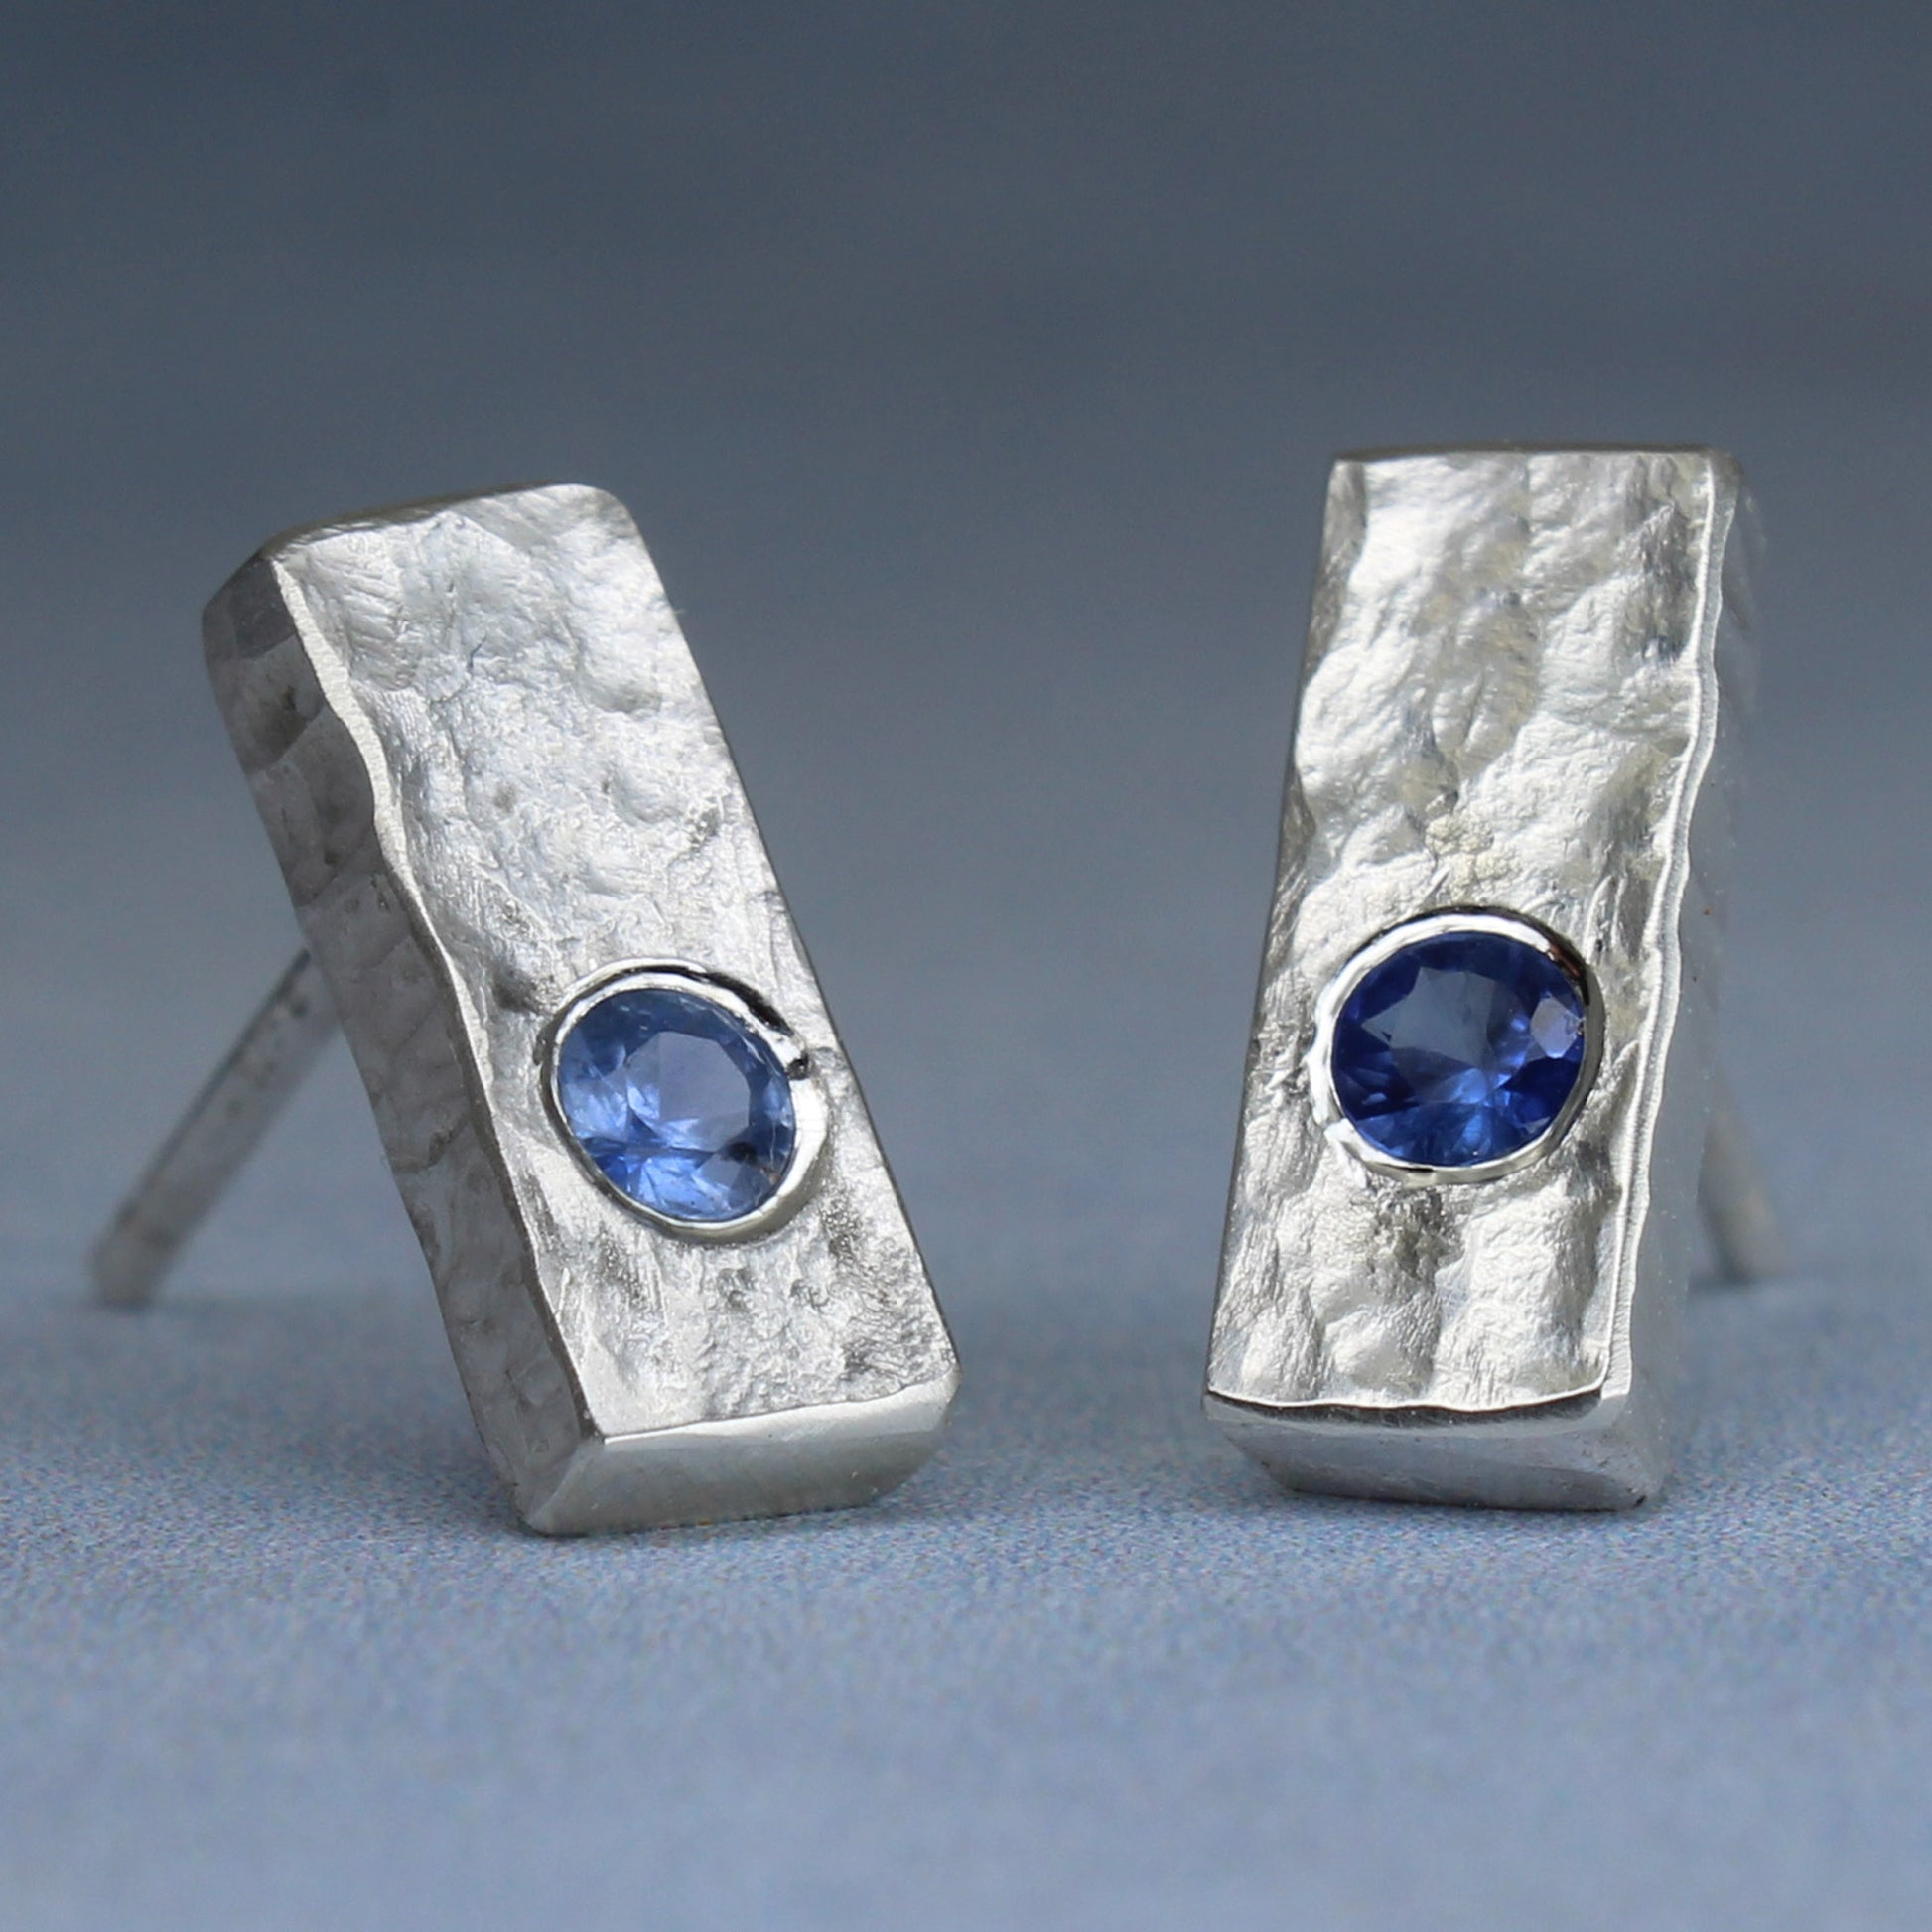 Sterling silver bar studs with blue sapphire gemstones, unisex post earrings